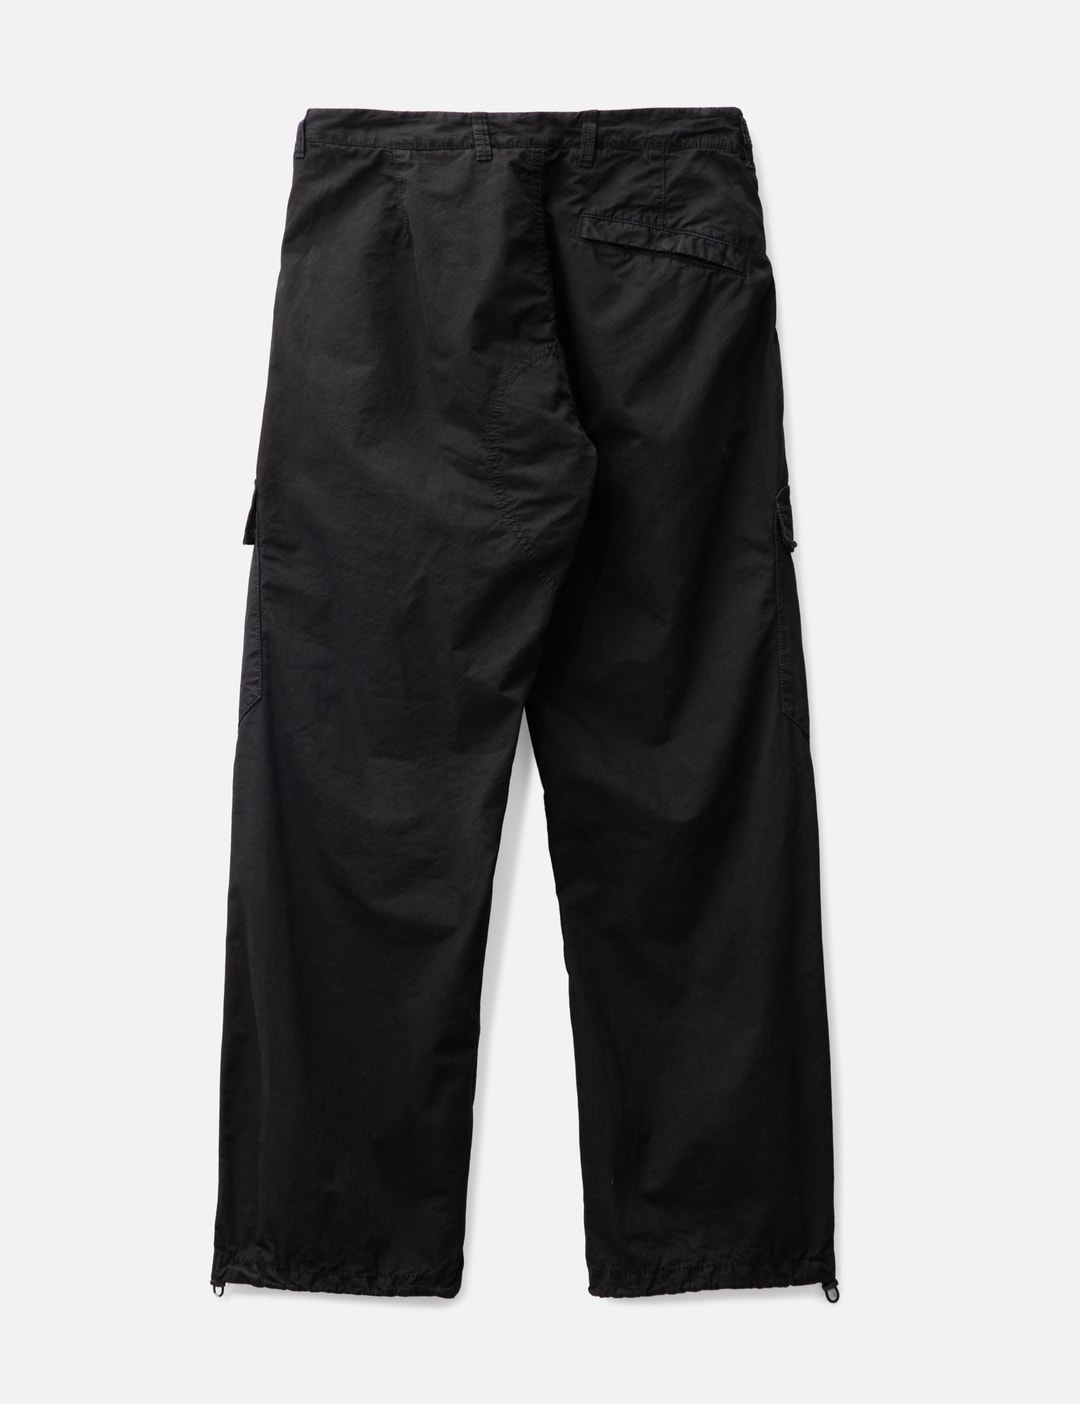 'OLD' TREATMENT CARGO PANTS - 2